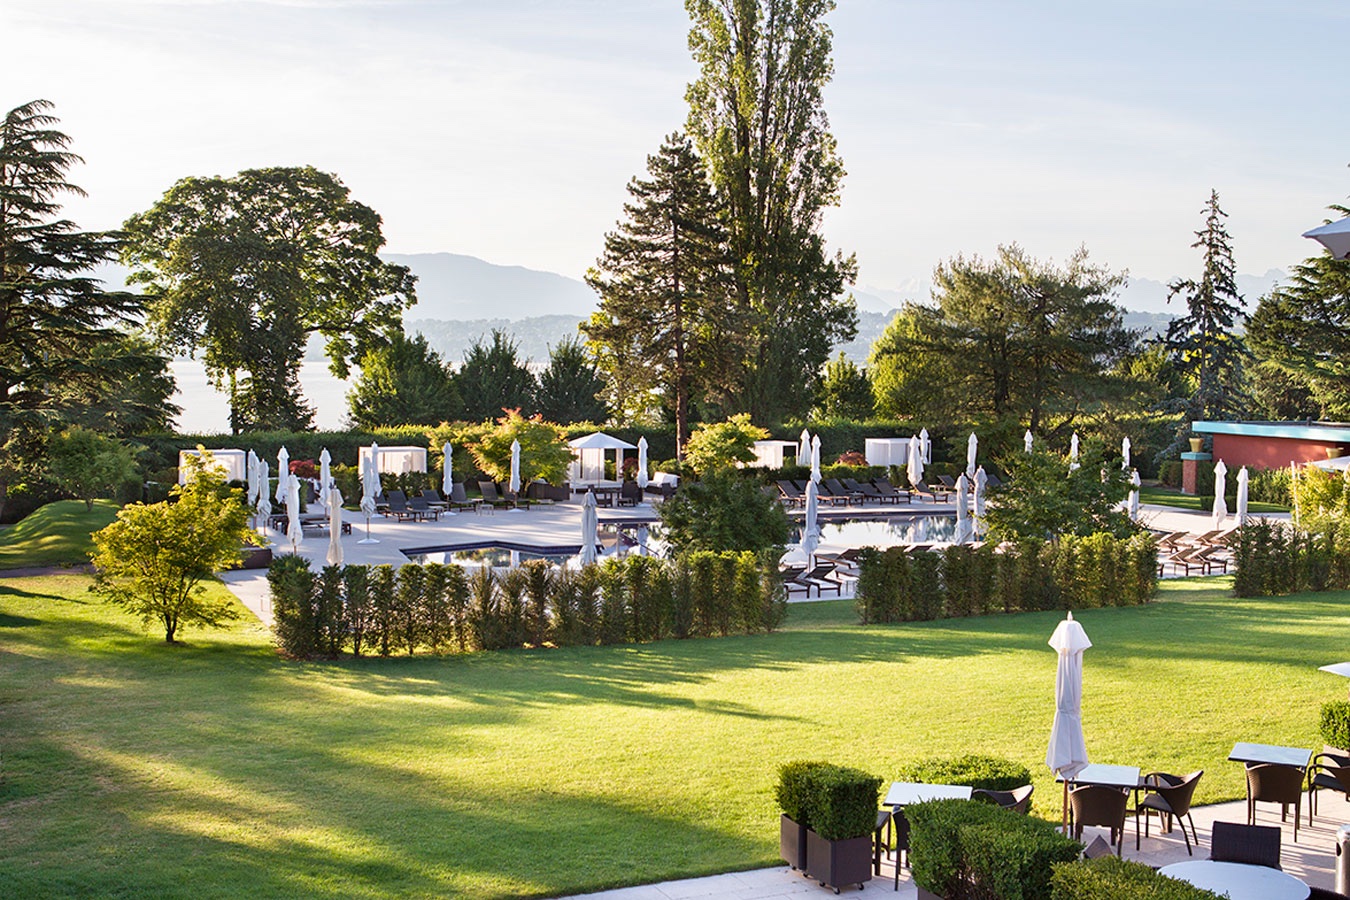 Review - The Nescens Better Ageing Programme at La Reserve, Geneva